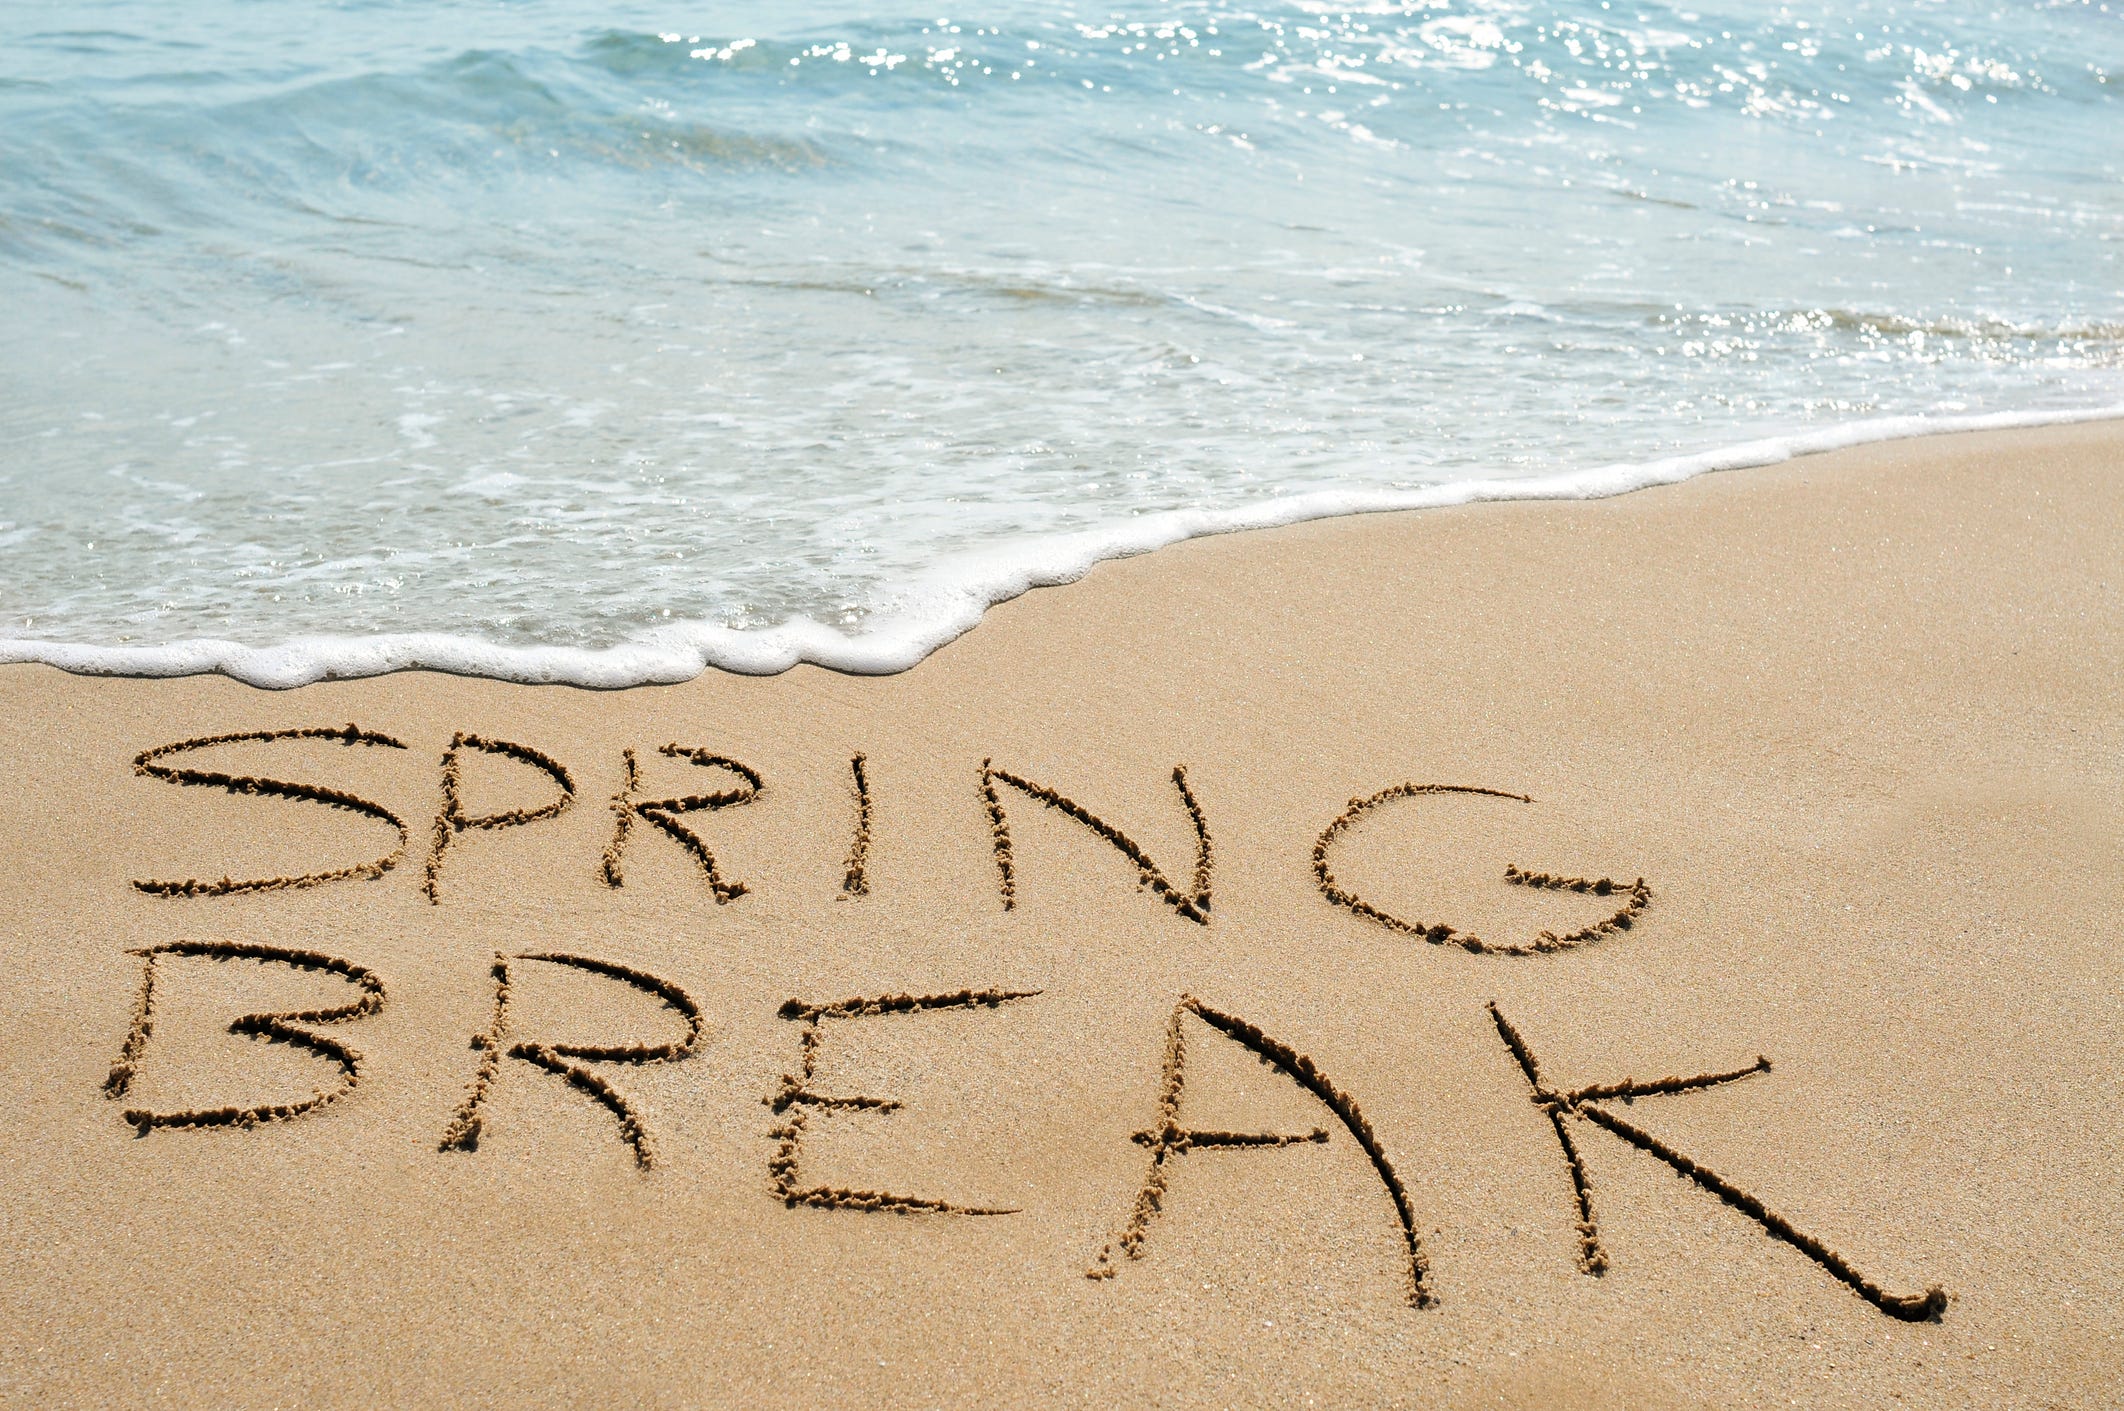 Cheap flights Here's how to book an inexpensive spring break trip